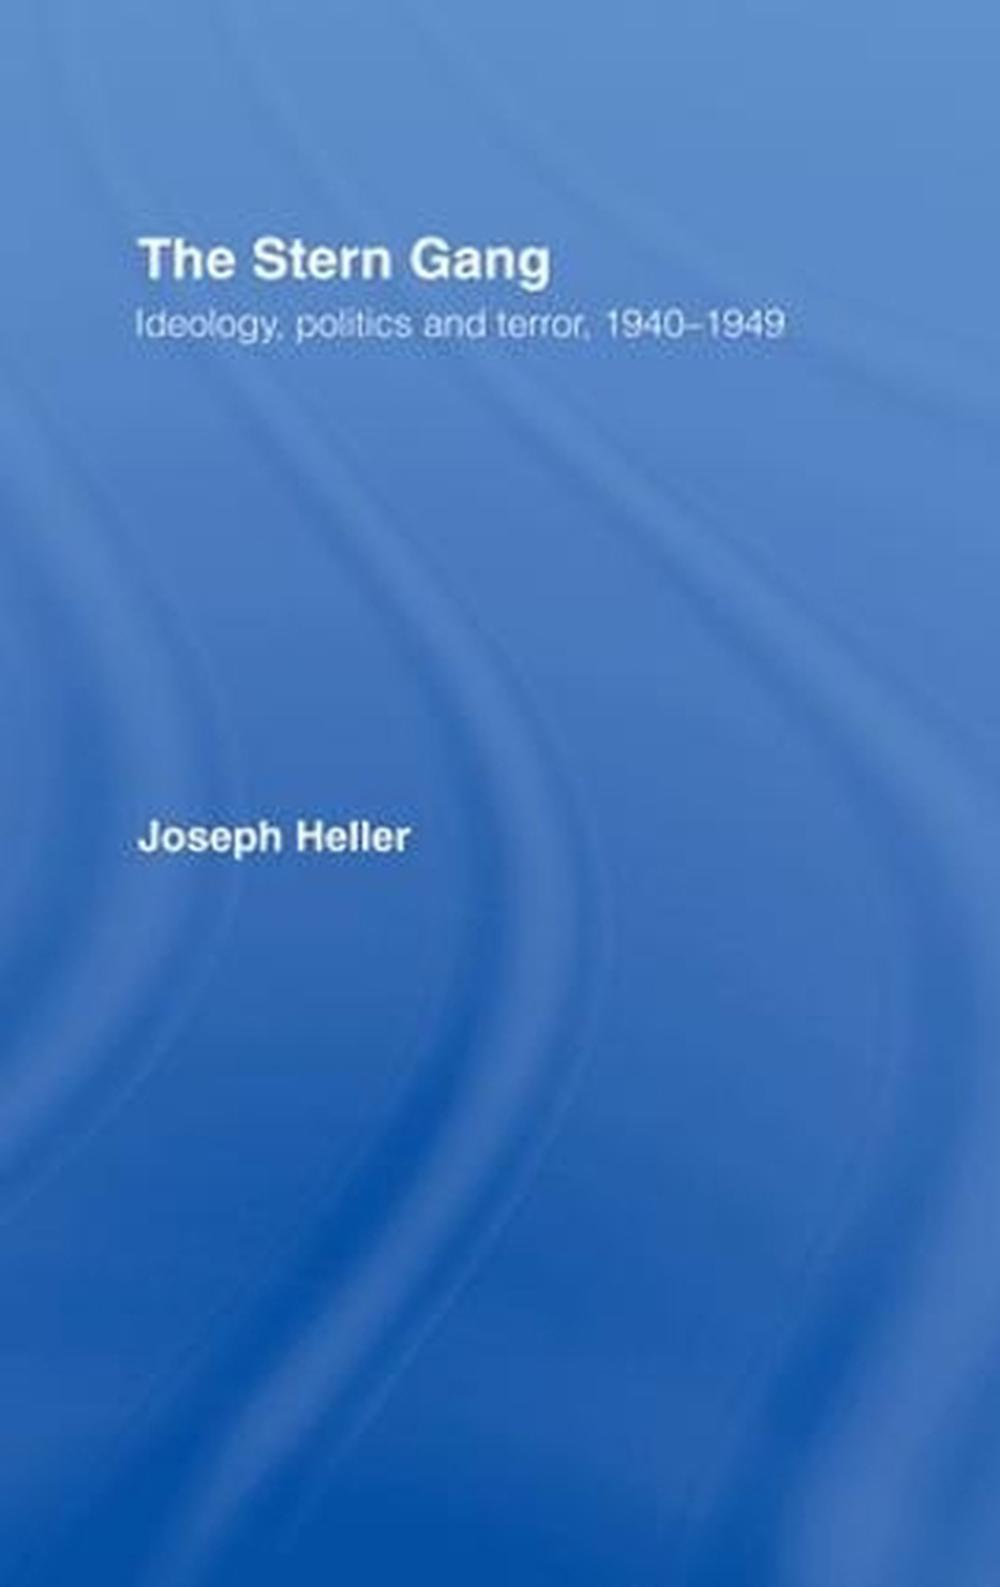 The Stern Gang Ideology, Politics and Terror, 19401949 by Joseph